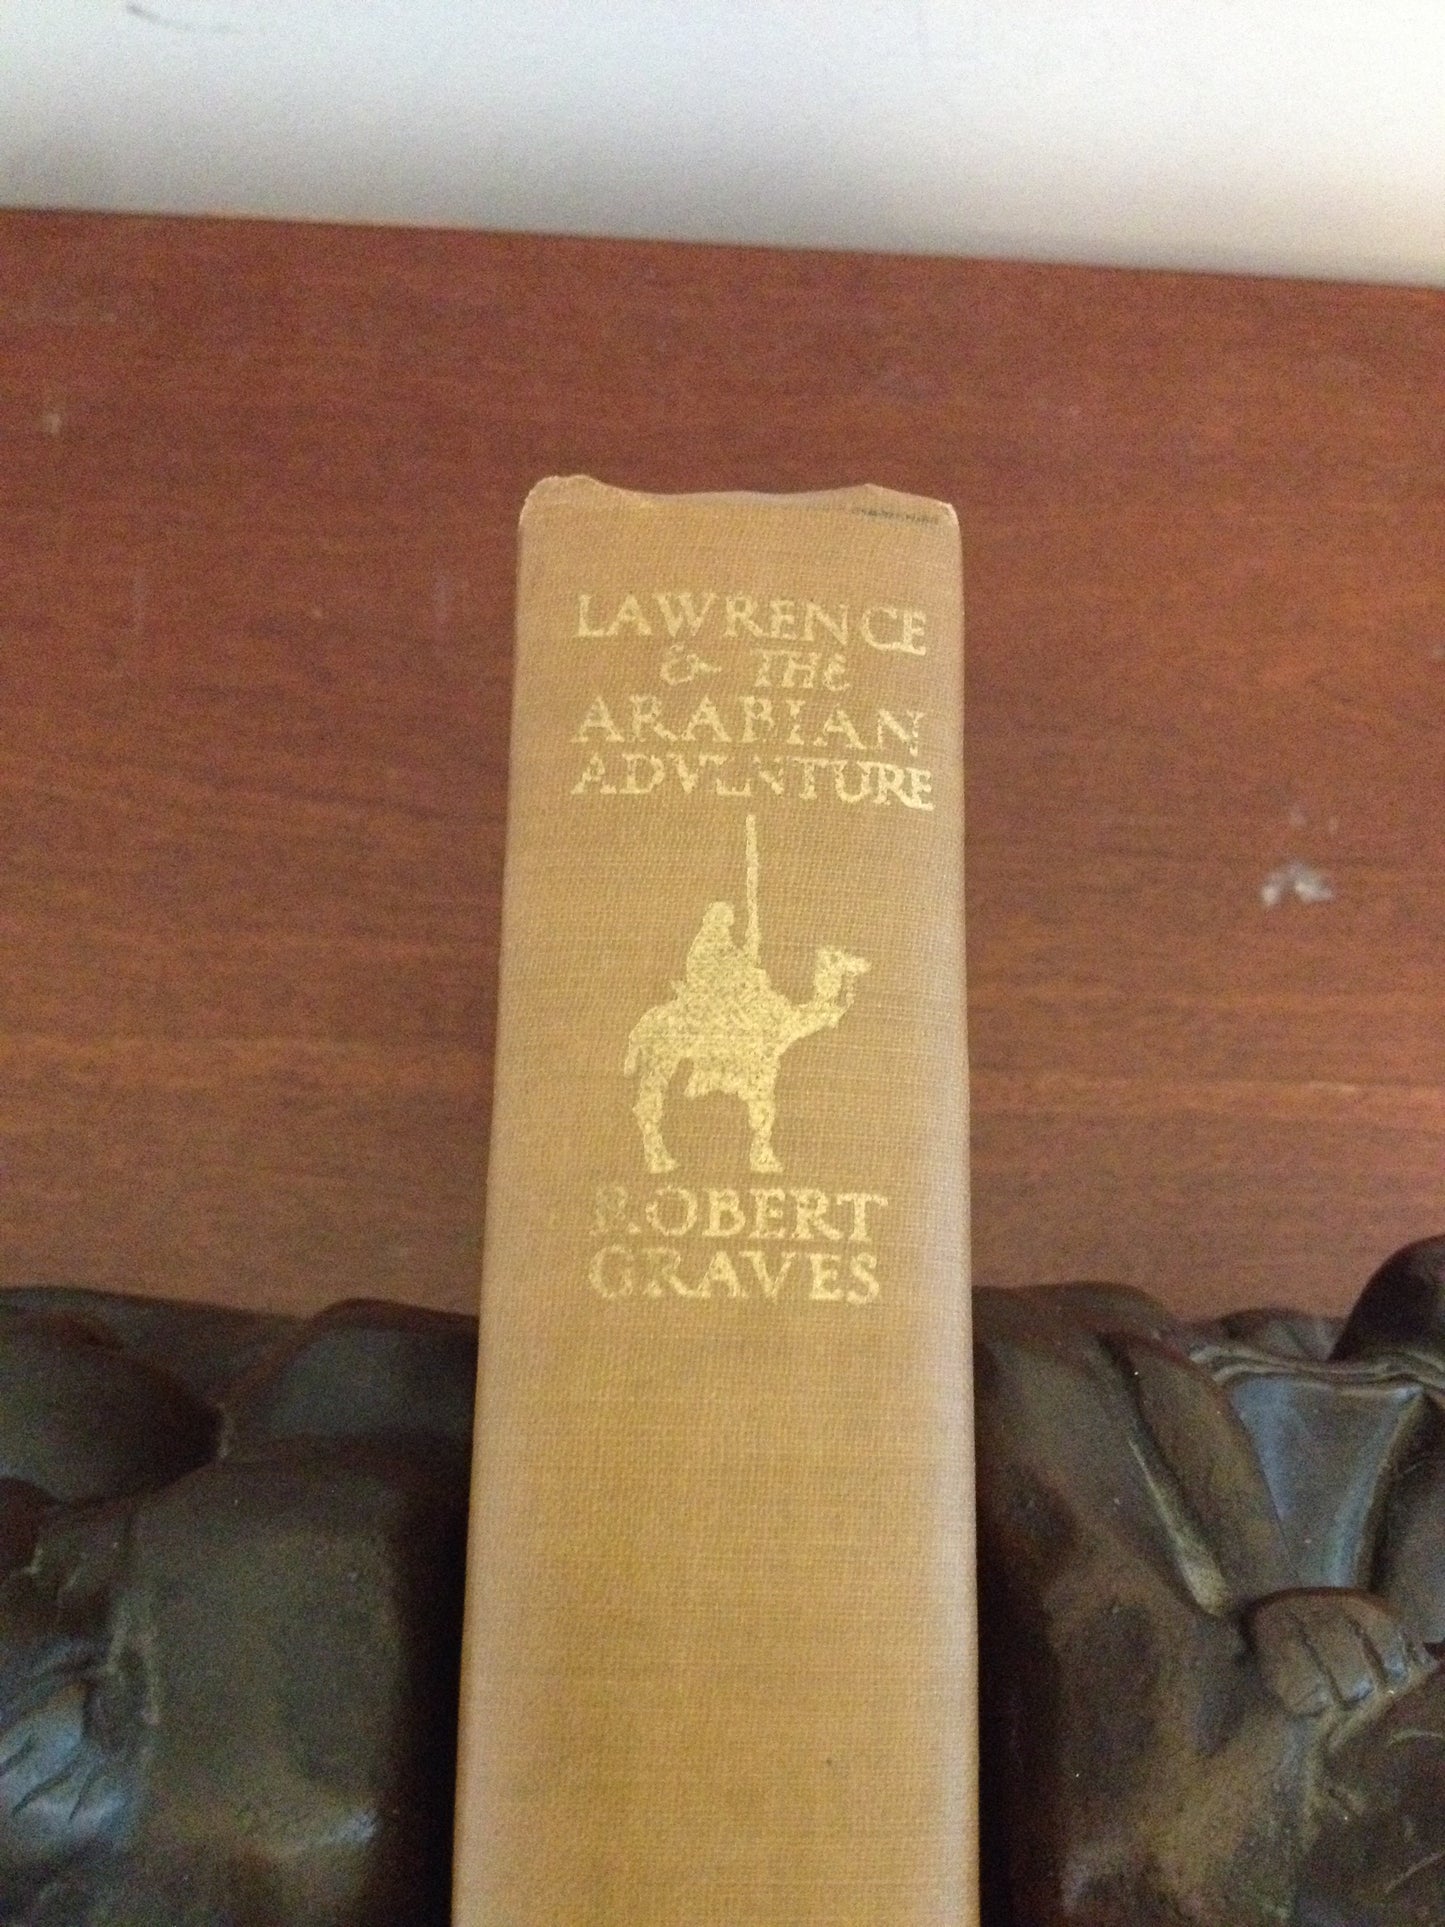 LAWRENCE AND THE ARABIAN ADVENTURE  - ROBERT GRAVES